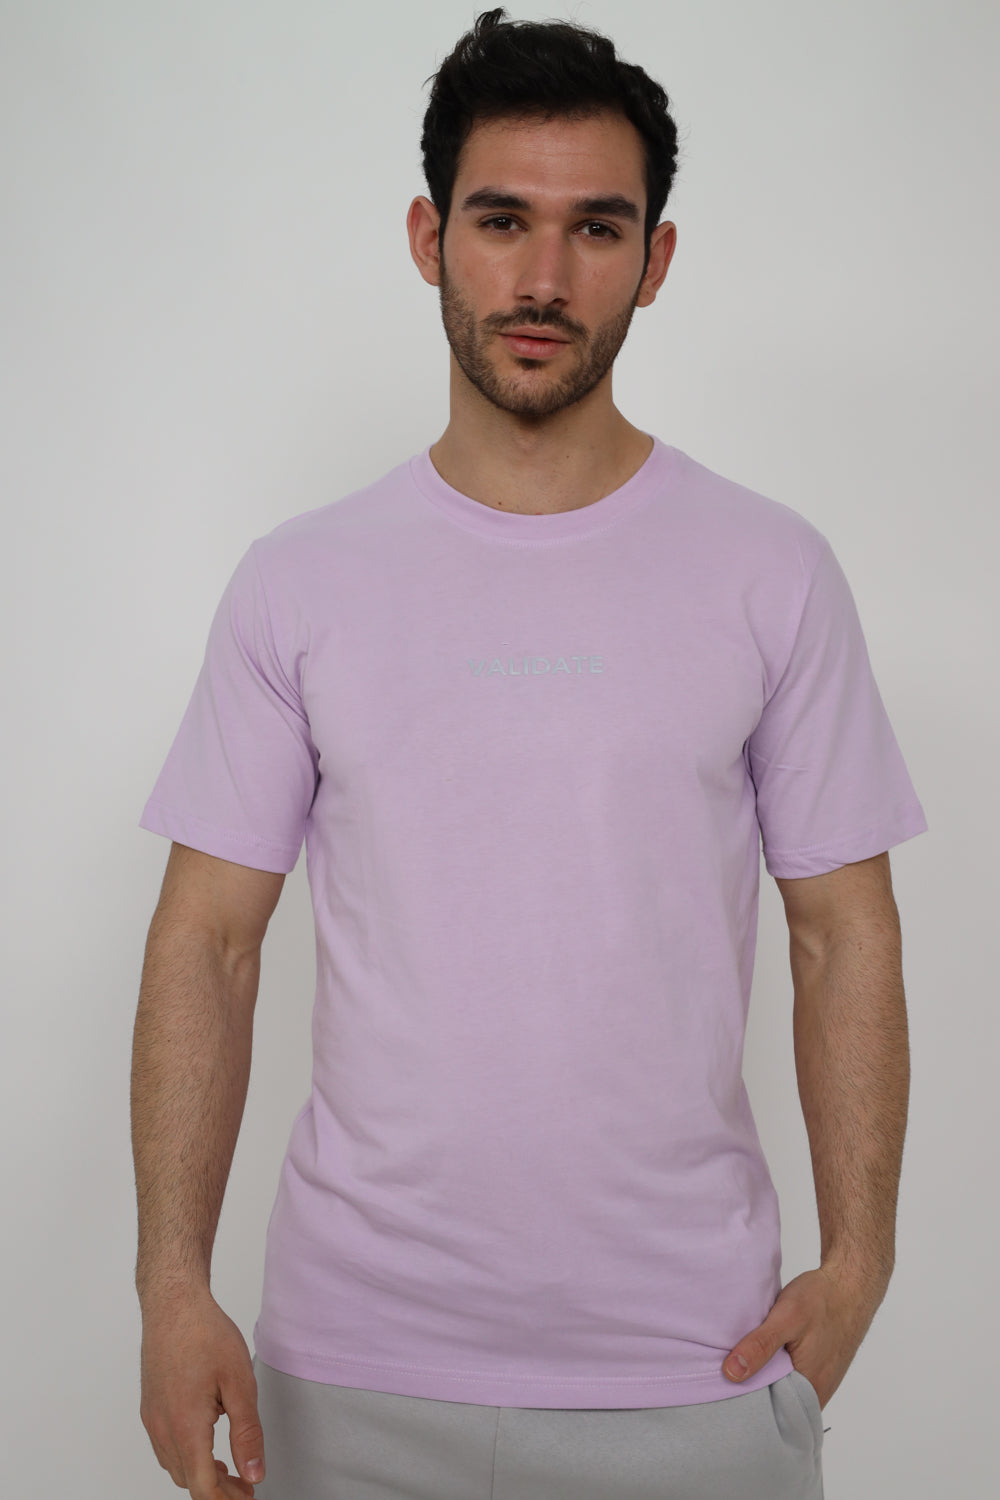 Validate Dale T-Shirt Pink